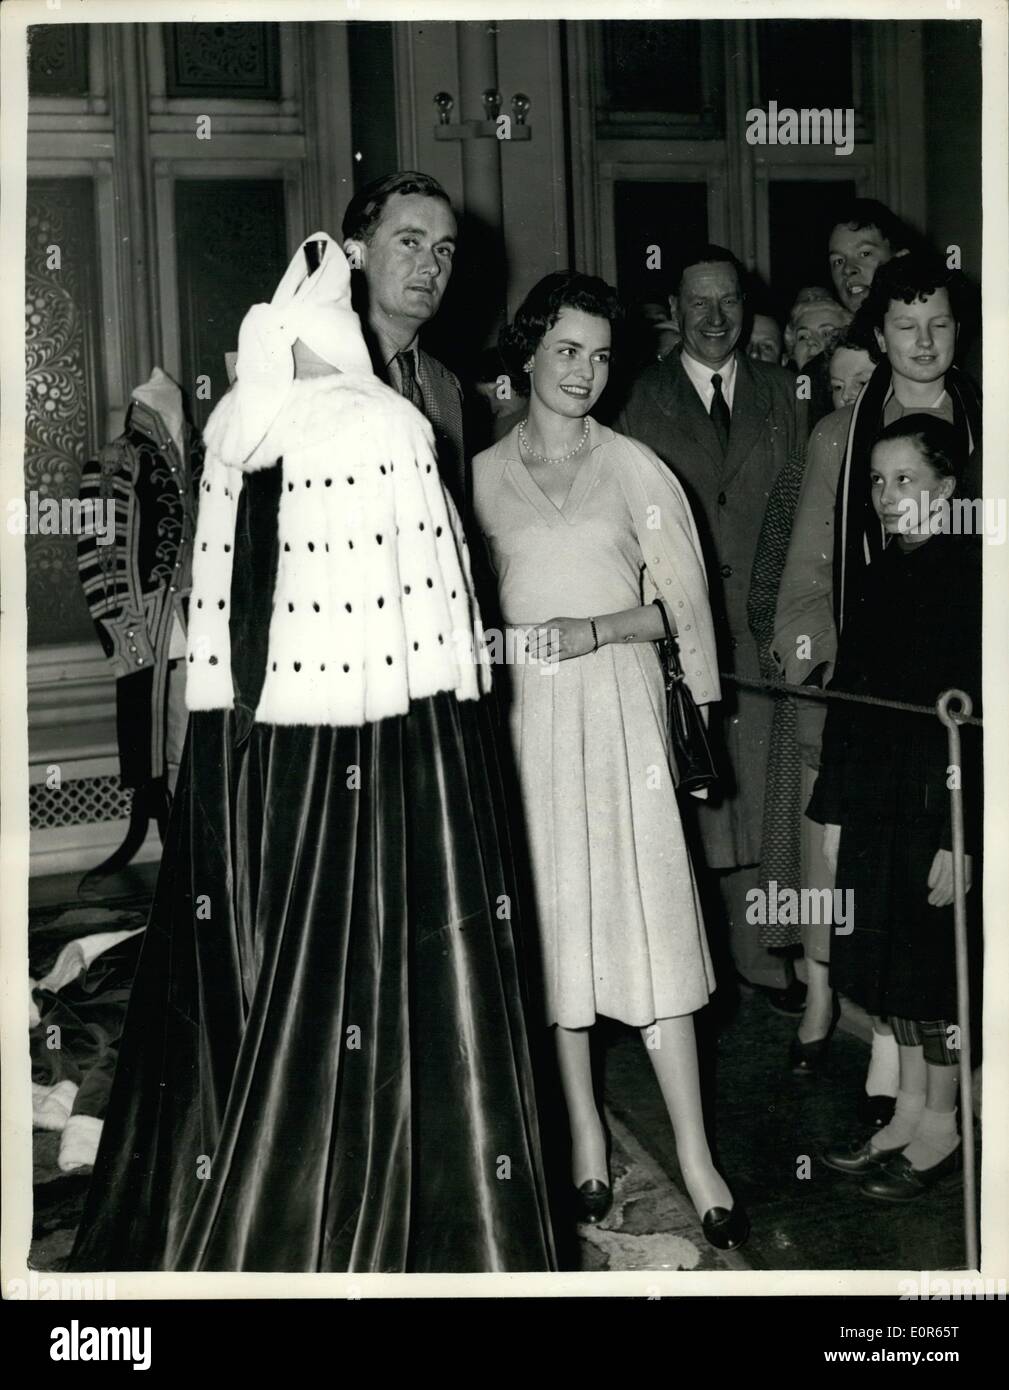 Apr. 04, 1958 - Duke of Ruthland AD His Fiancee Show - Off His Coronation Robes at Belvoir Castle - The Duke of Ruthland spent the Bank Holiday showing crowds of Sightseers round his home, Belvoir Castle, and togeather with his fiances, Miss Francis Sweeny, the 20-year old daughter of the Duchess of Argyll, they showed off his Coronation Robes. Photo Shows:- The Duke of Ruthland with his fiancee, Miss Frances Sweeny, as the show off his Coronatte Robes at his home, Belvoir Castle Yesterday. Stock Photo